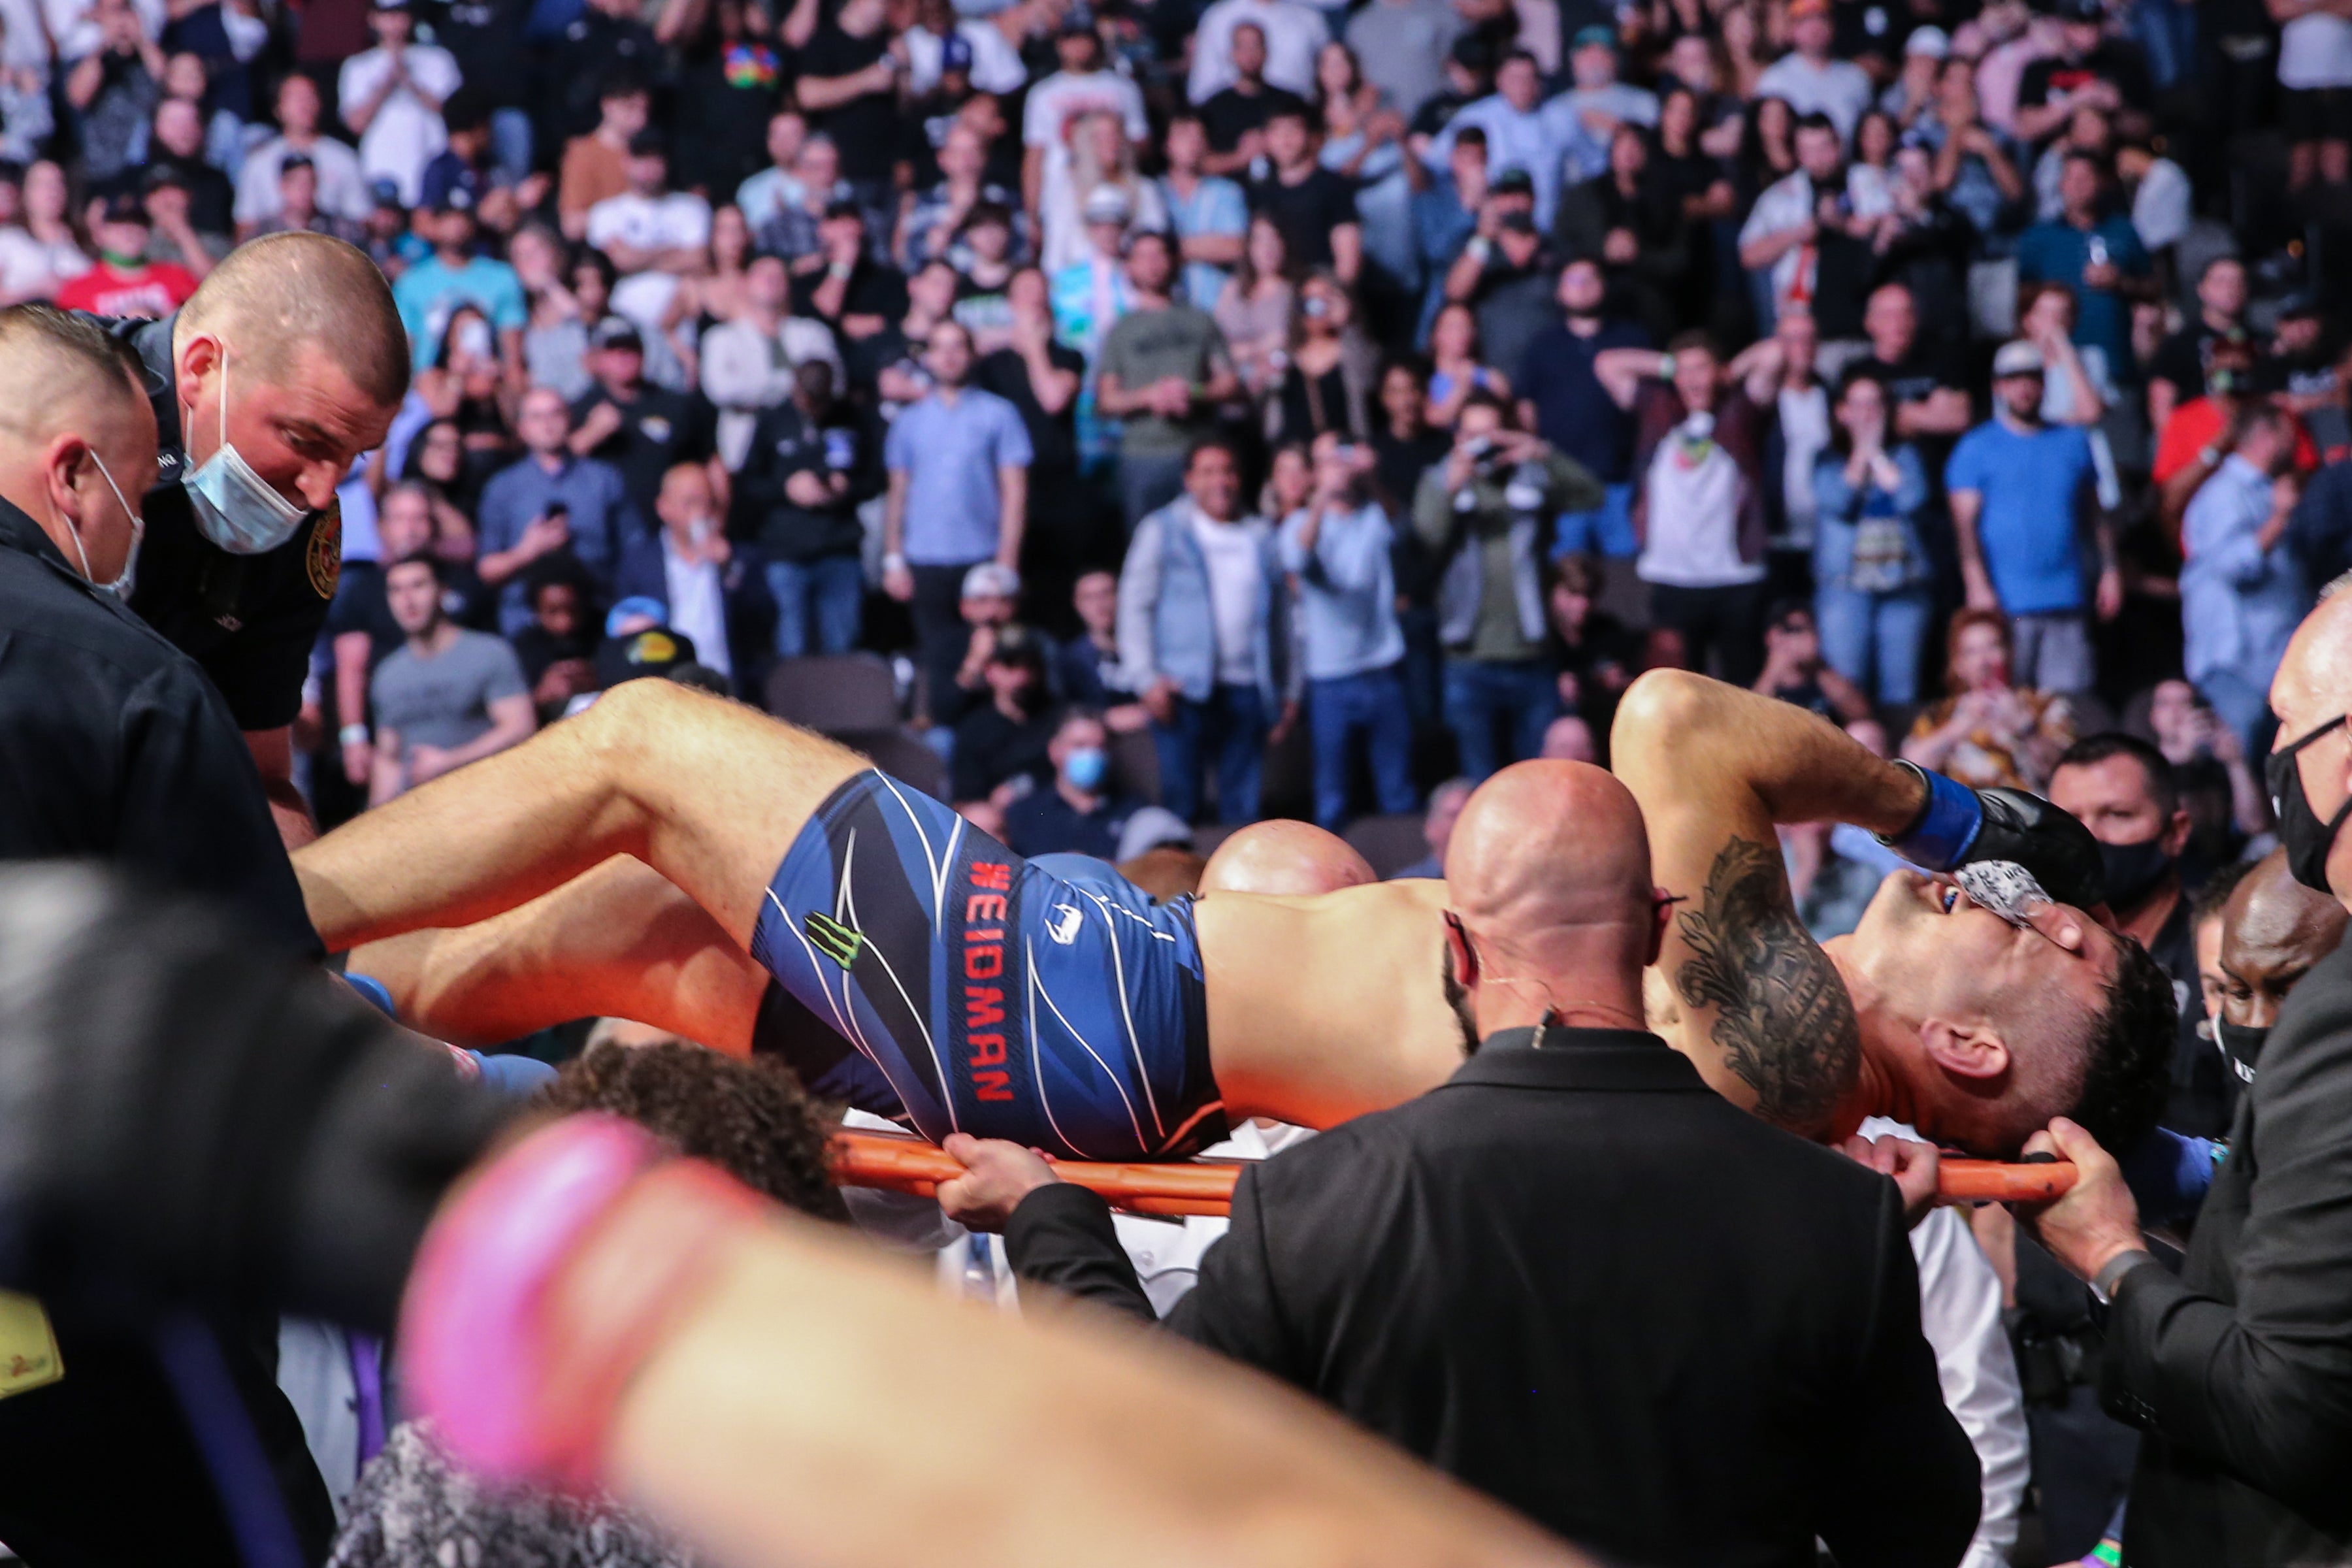 Chris Weidman was stretchered out of the VyStar Veterans Memorial Arena